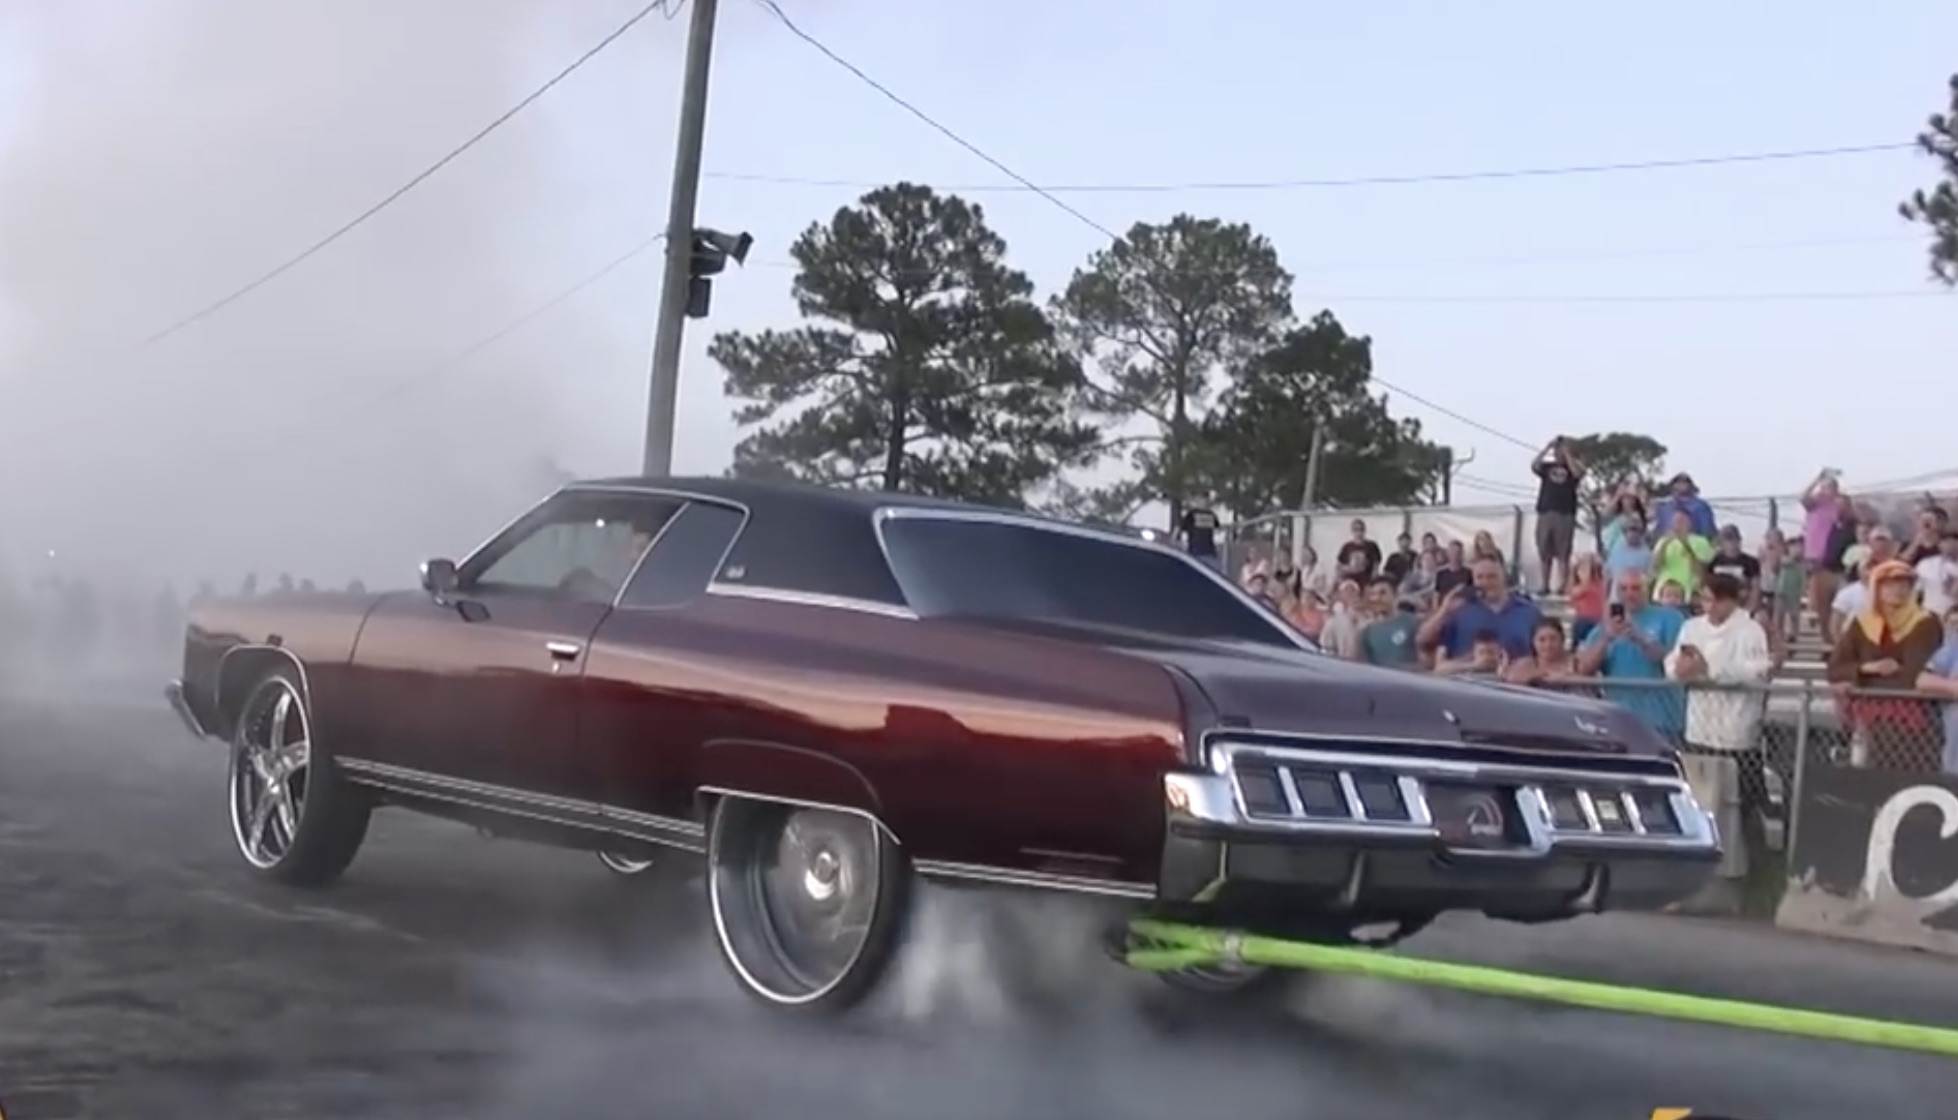 Donk, Meet Swamp Donkey: A Blown LS7-Powered Caprice On 26s vs. A Mega Truck In A Tug-Of-War